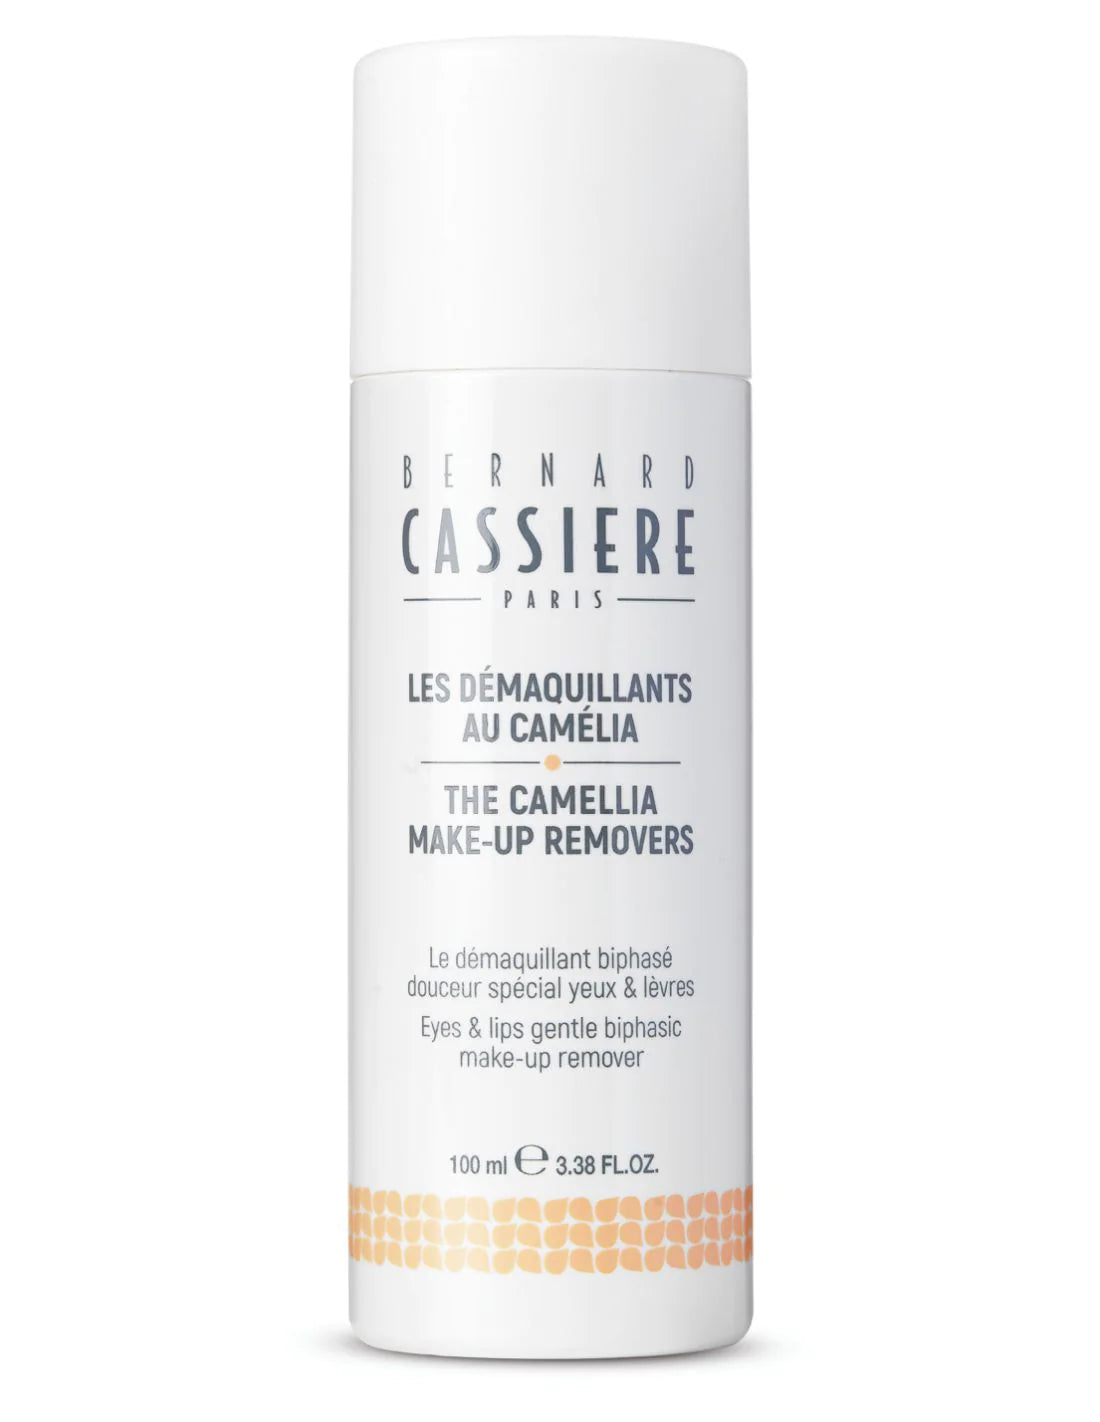 BERNARD CASSIERE - EYES AND LIPS GENTLE BIPHASIC MAKE-UP REMOVER